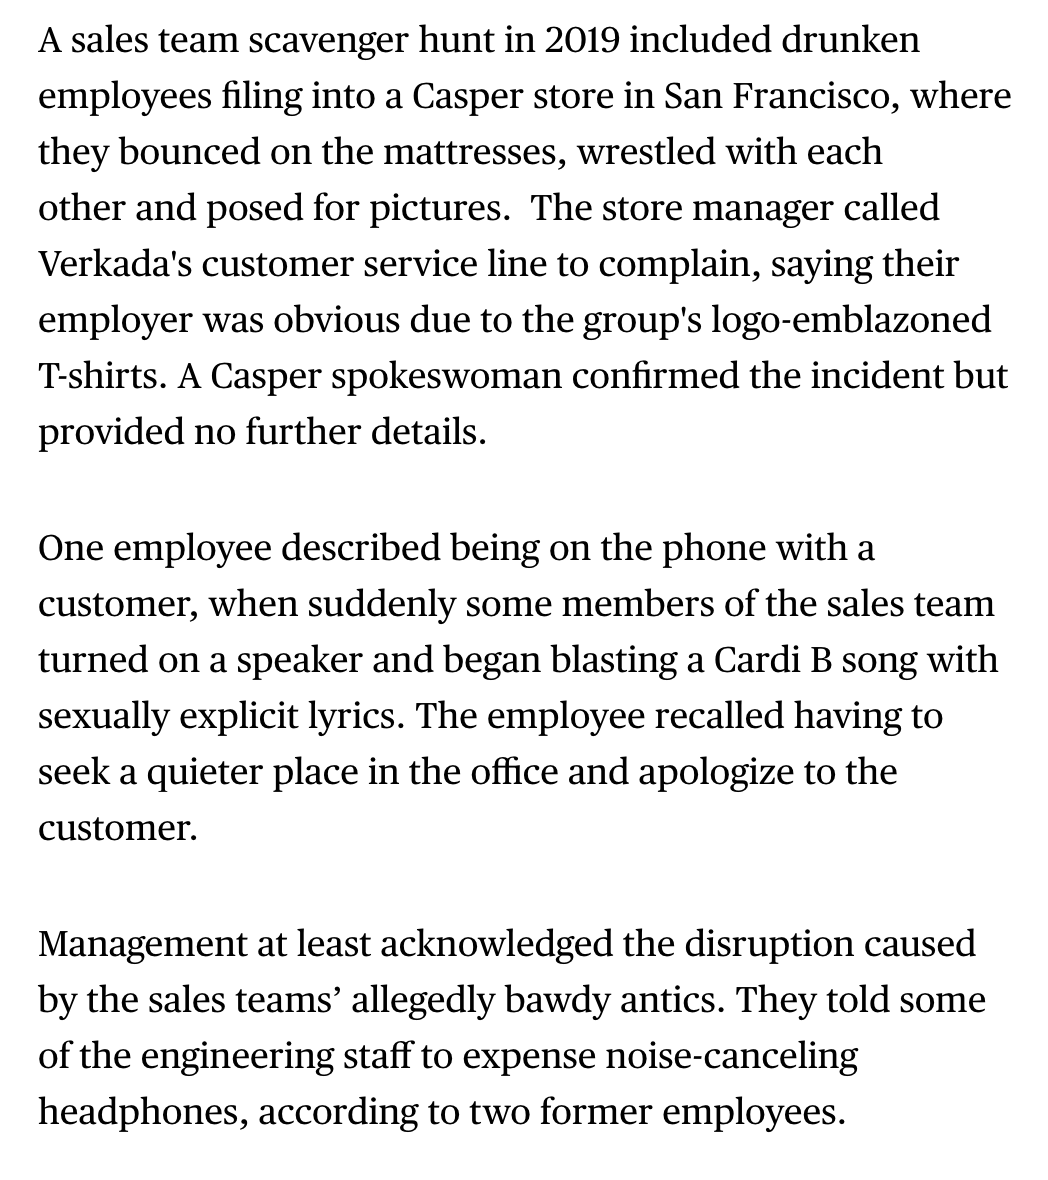 A sales team scavenger hunt ended with drunken Verkada employees piling into a Casper mattress store where they bounced on the mattresses, wrestled with each other and posed for pictures. Engineers were told they could expense noise cancelling headphones.  https://www.bloomberg.com/news/articles/2021-04-09/-bro-culture-at-camera-maker-verkada-pushed-profits-parties?sref=ylv224K8